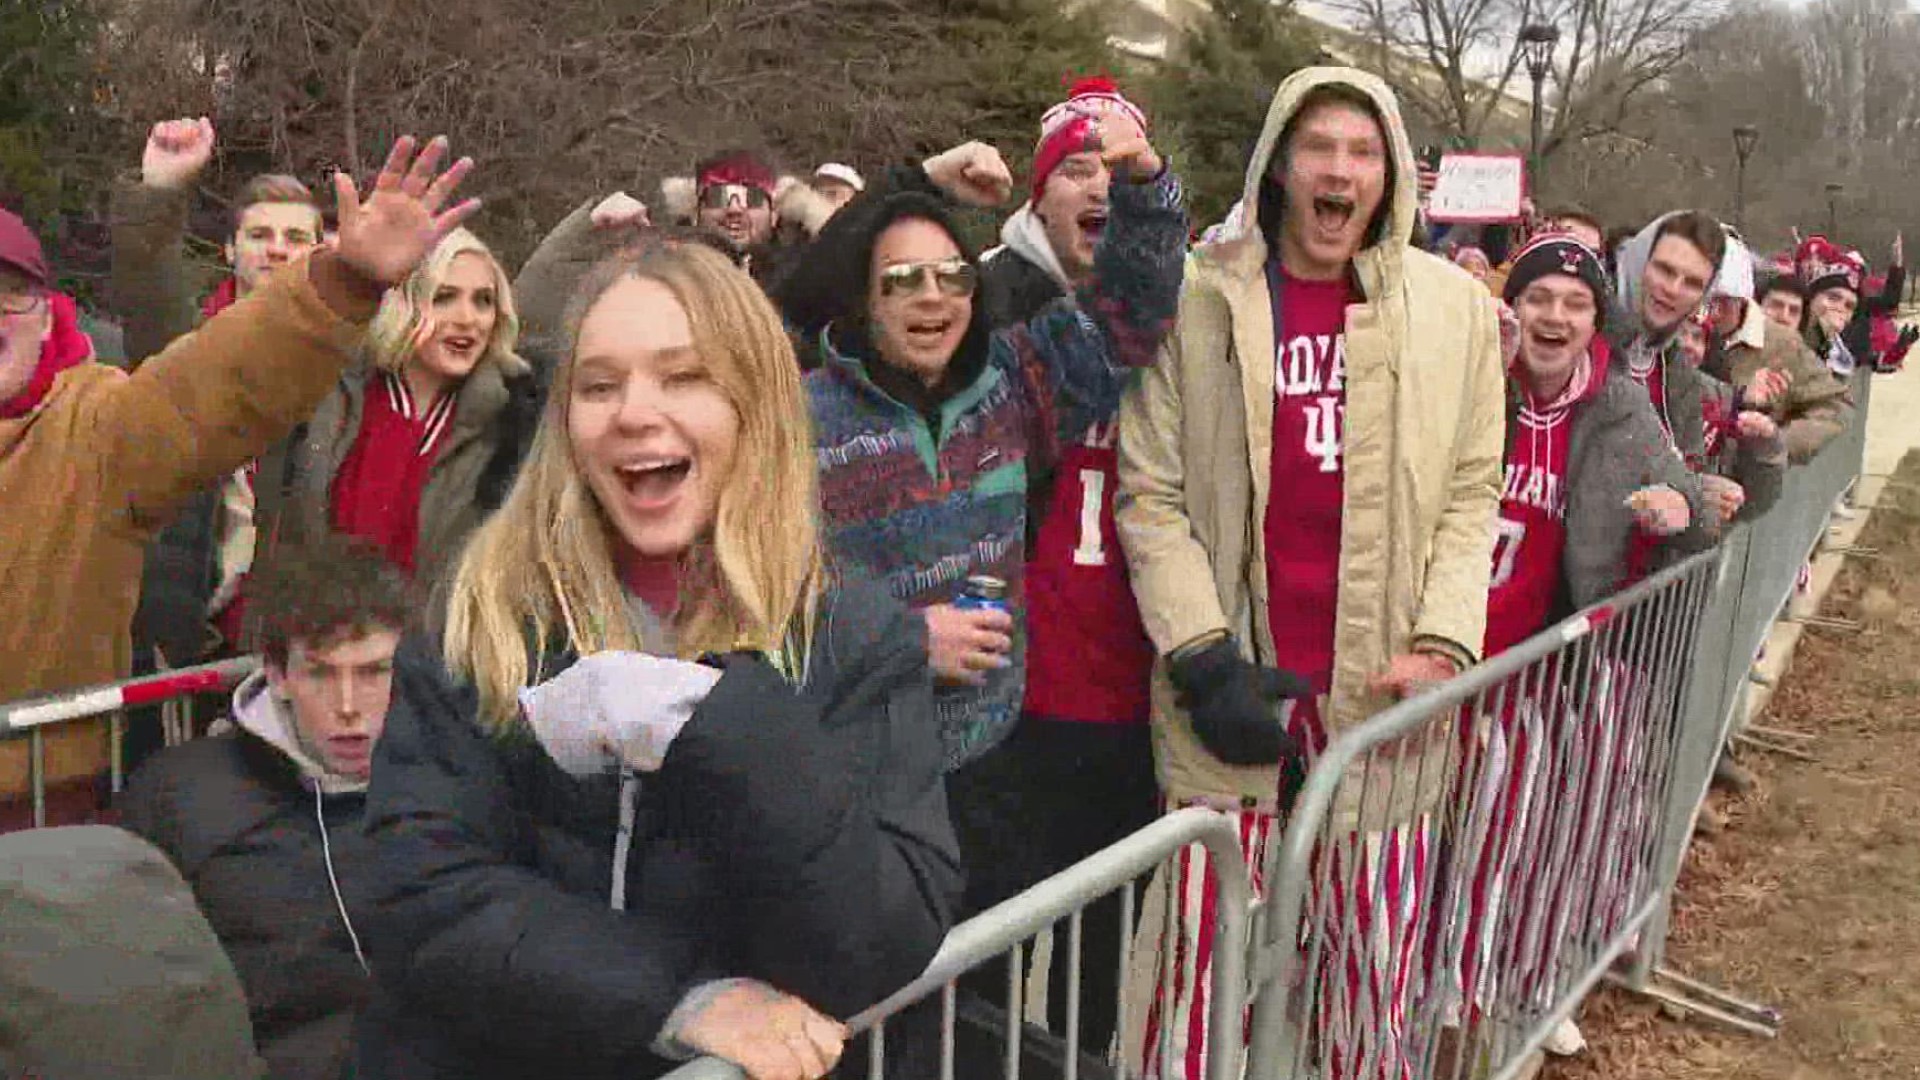 Dave Calabro visited the IU Bloomington campus Thursday ahead of a big basketball matchup with Purdue.